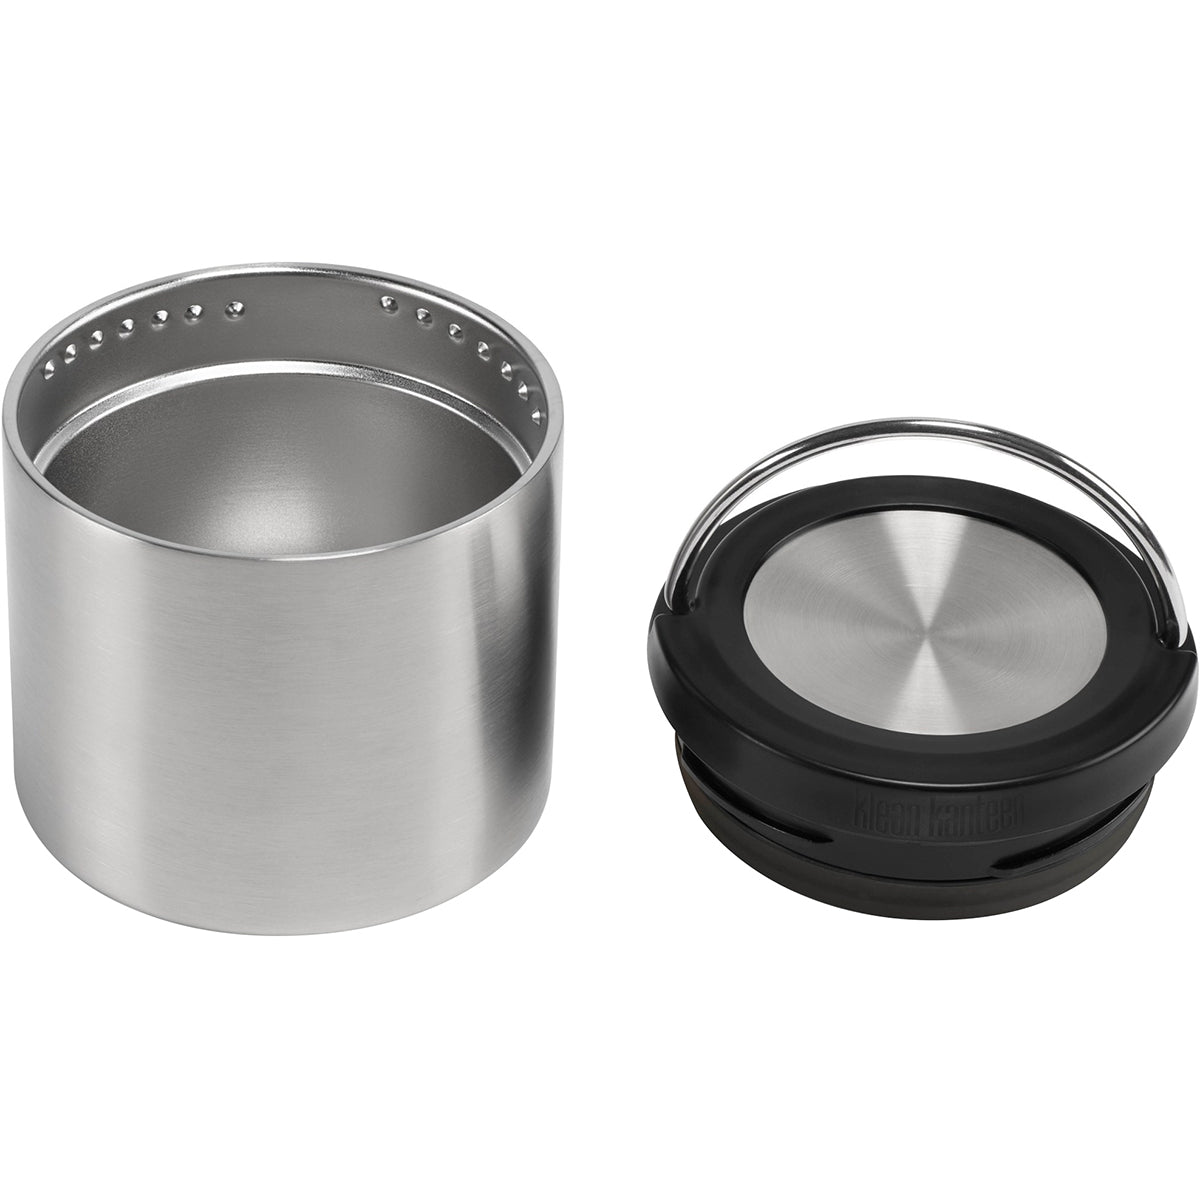 Klean Kanteen Brushed Stainless Steel TKCanister with Insulated Lid Klean Kanteen